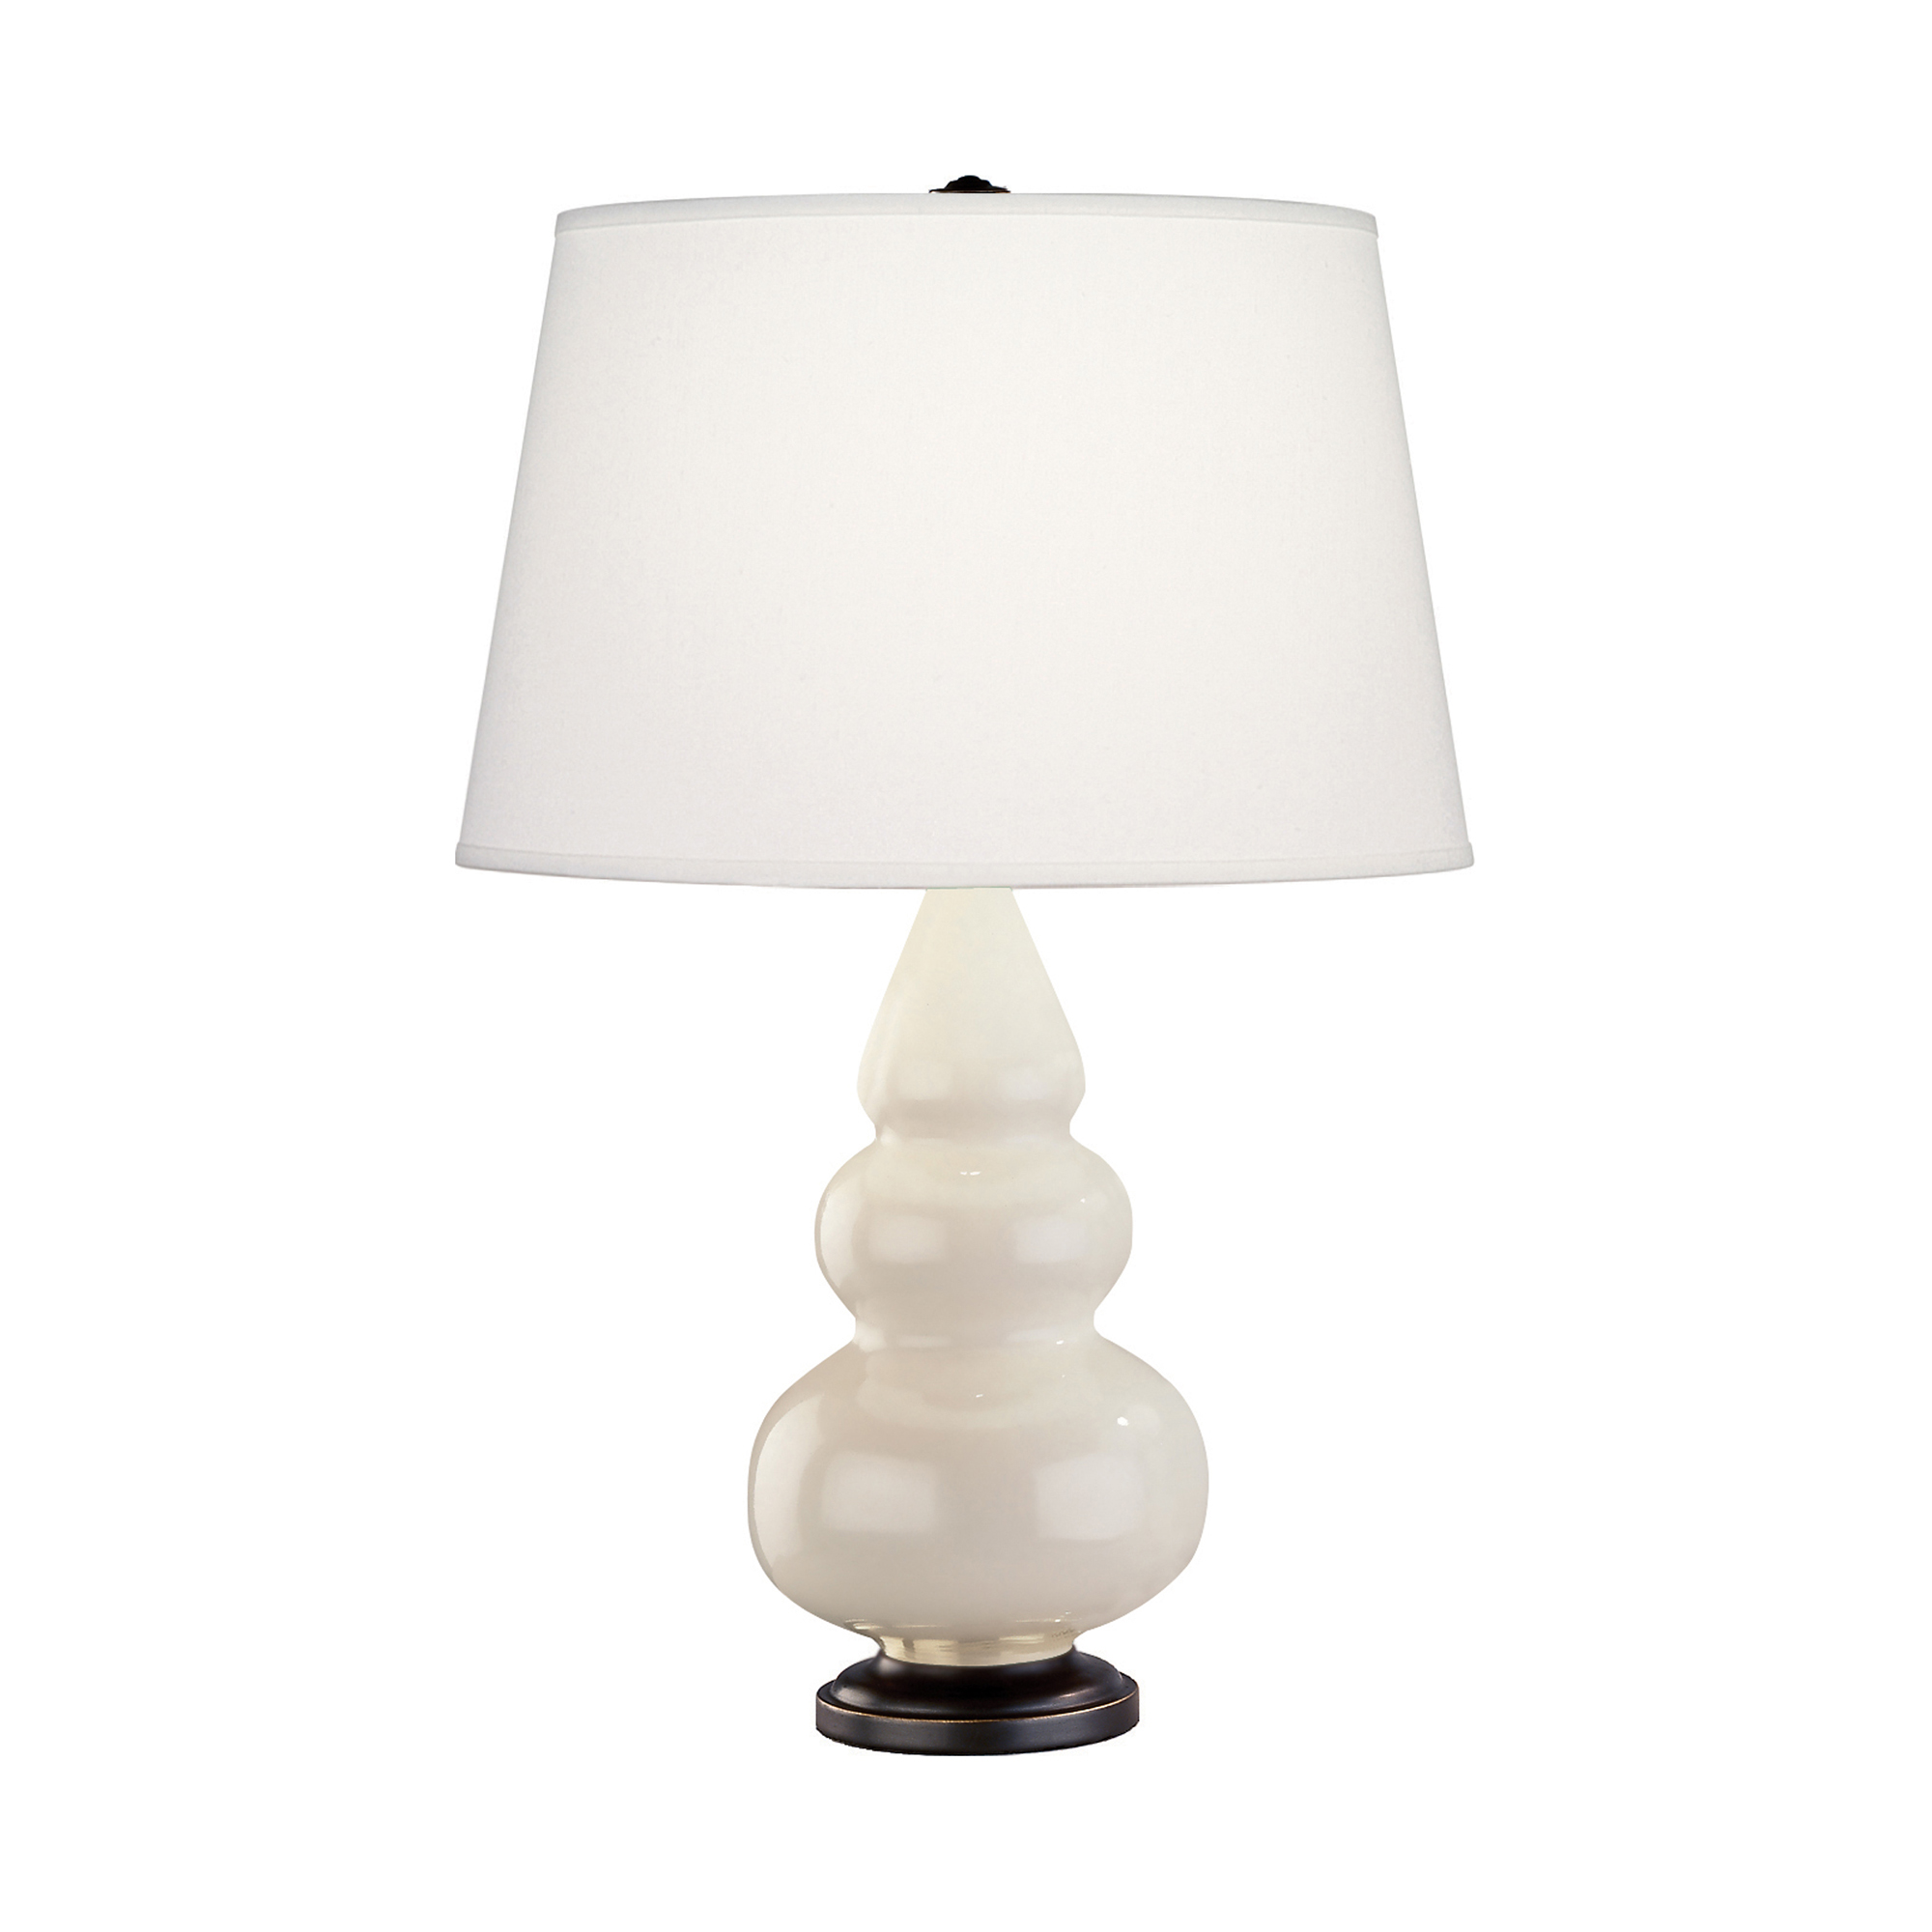 Small Triple Gourd Accent Lamp Style #274X